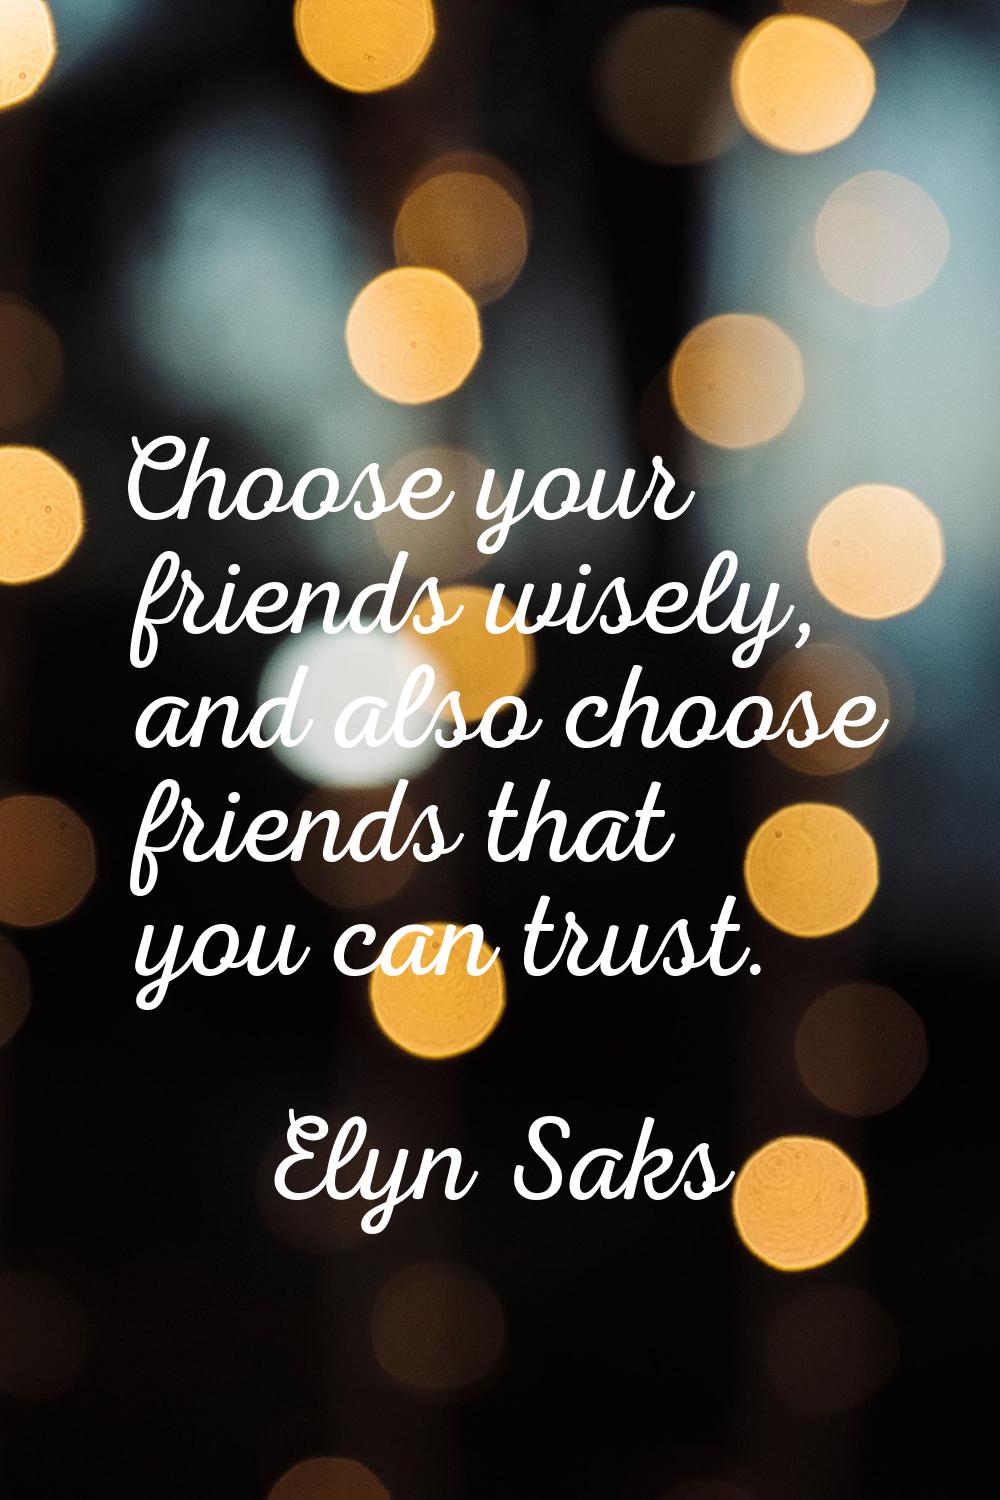 Choose your friends wisely, and also choose friends that you can trust.